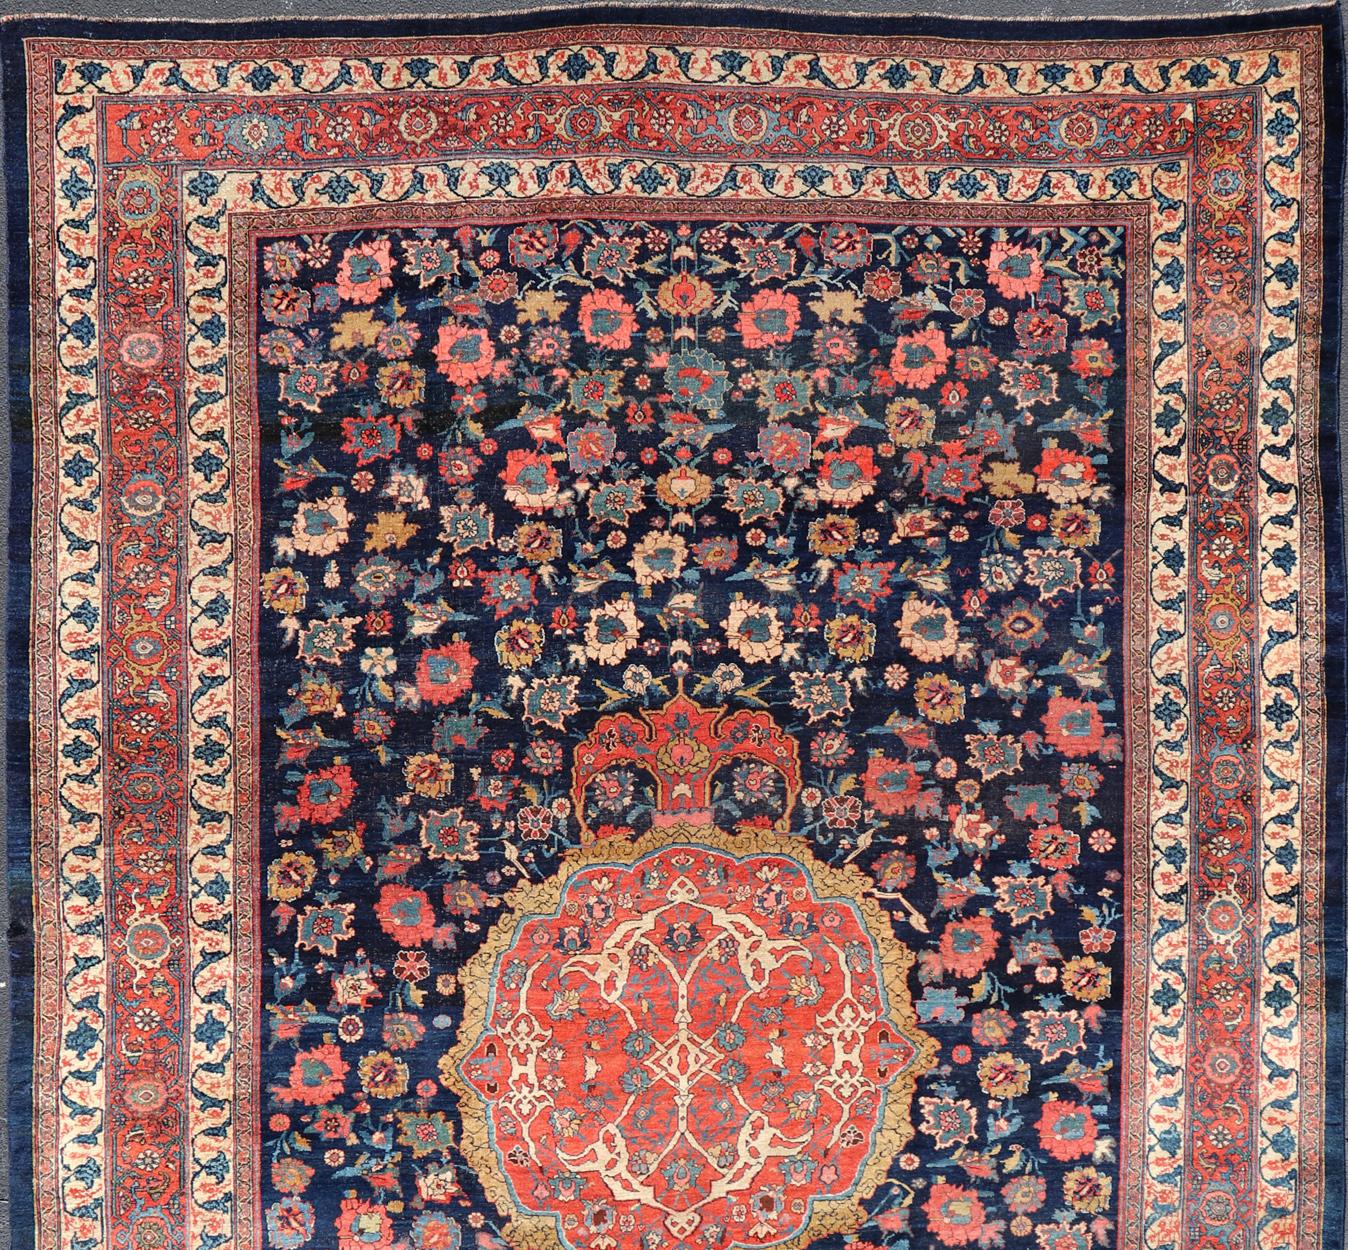 Colorful antique Persian large Bidjar rug with central medallion and all over rose and flower pattern. set on a navy blue background, rug R20-0803, country of origin / type: Iran / Bidjar, late 19th century

This beautiful large antique Bidjar rug